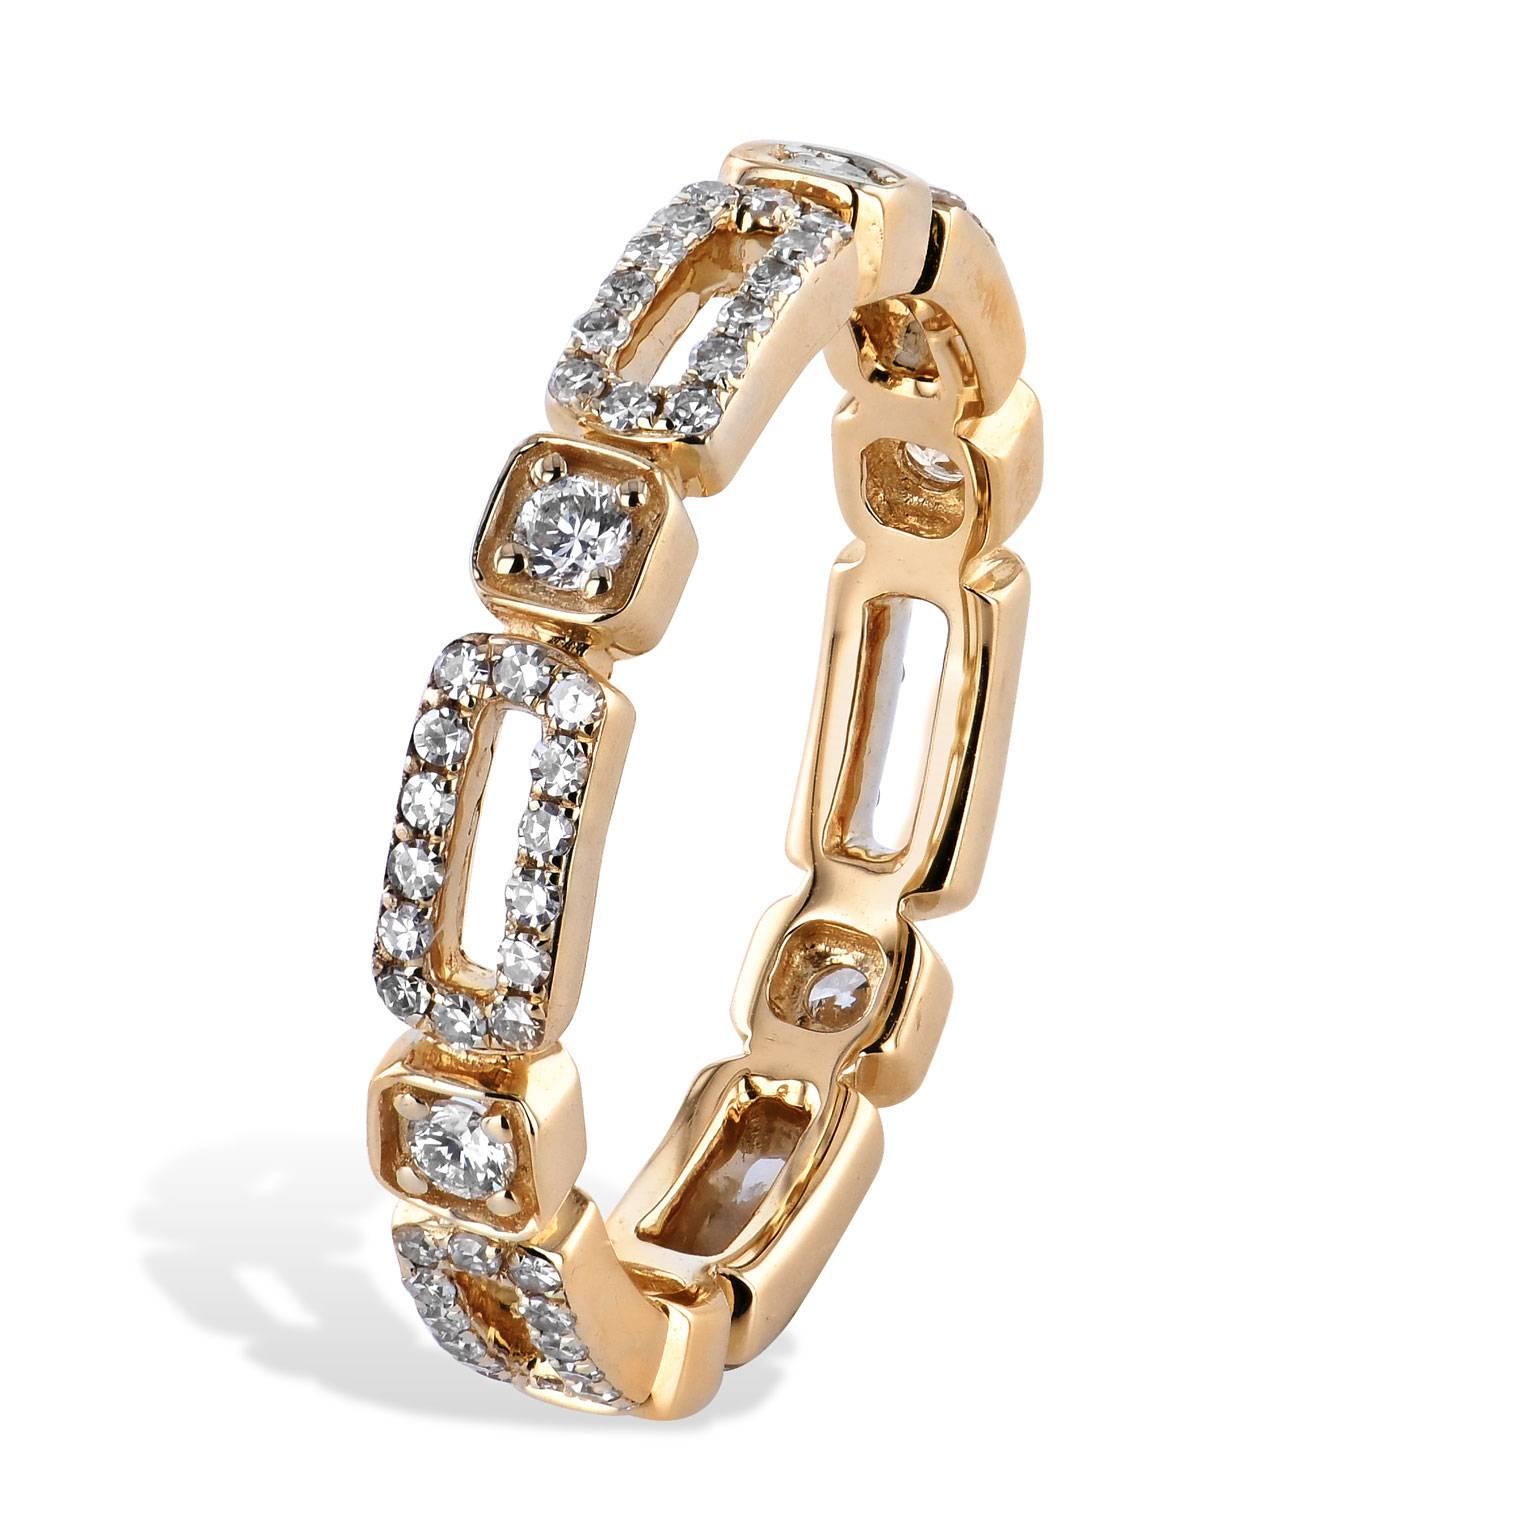 Rectangle and square shapes interface in this 0.53 carat diamond 14 karat yellow gold eternity-style band ring.

Size 7